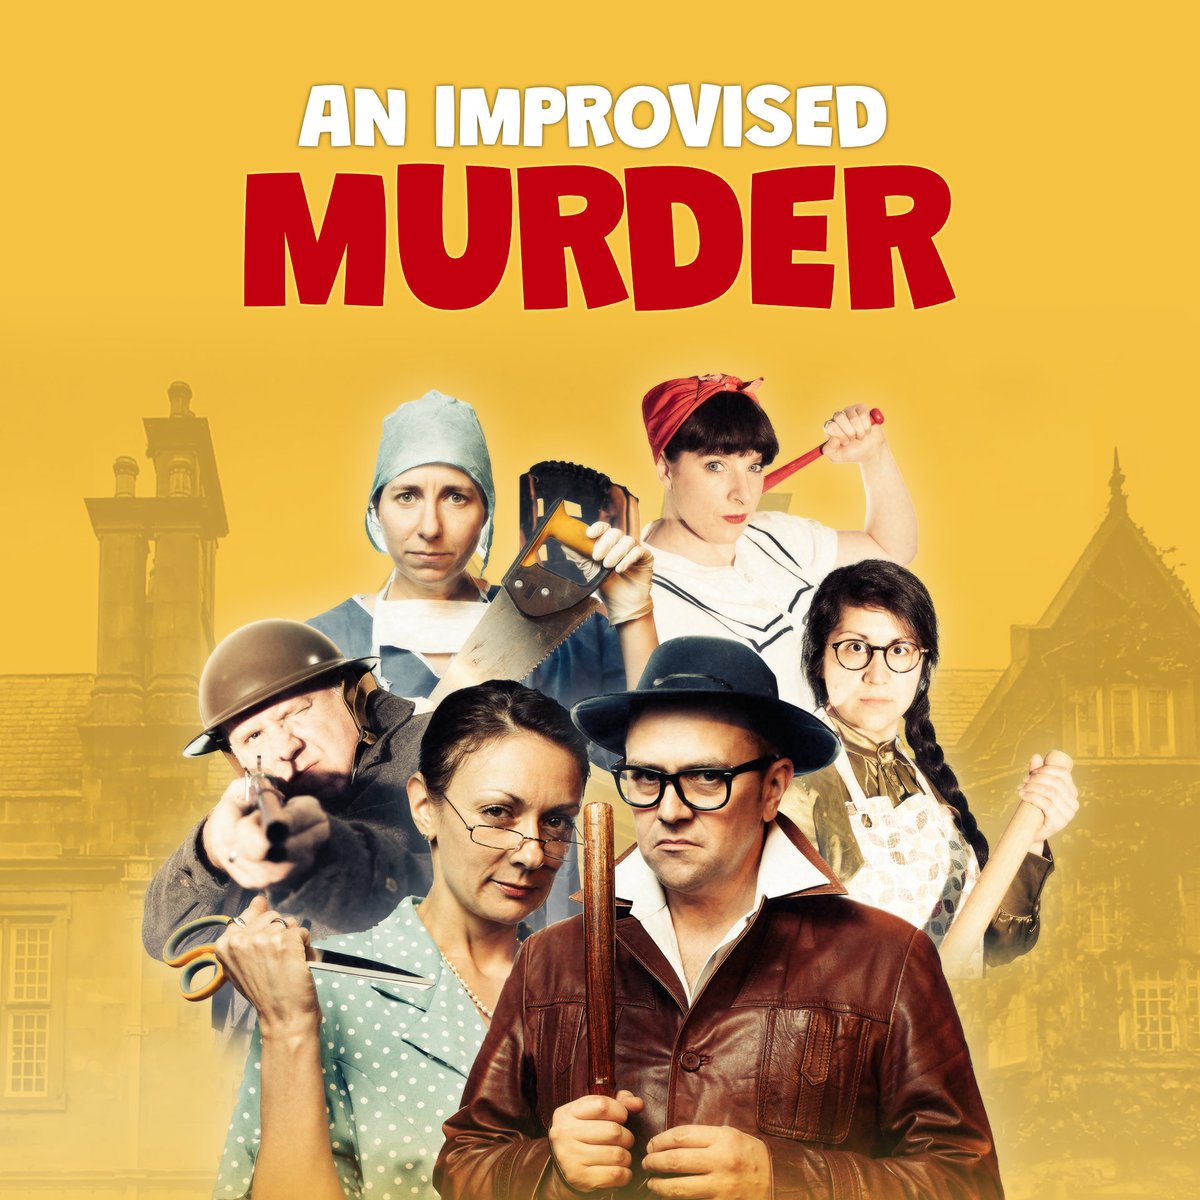 THERE'S BEEN A MURDER!!... Or there will be, once you help create the mystery! 🔎 An Improvised Murder 📅 18th July Join Foghorn Unscripted for a night of hilarity, mystery and mayhem. No scripts, no plans, just you, us, and a classic whodunnit waiting to be born.